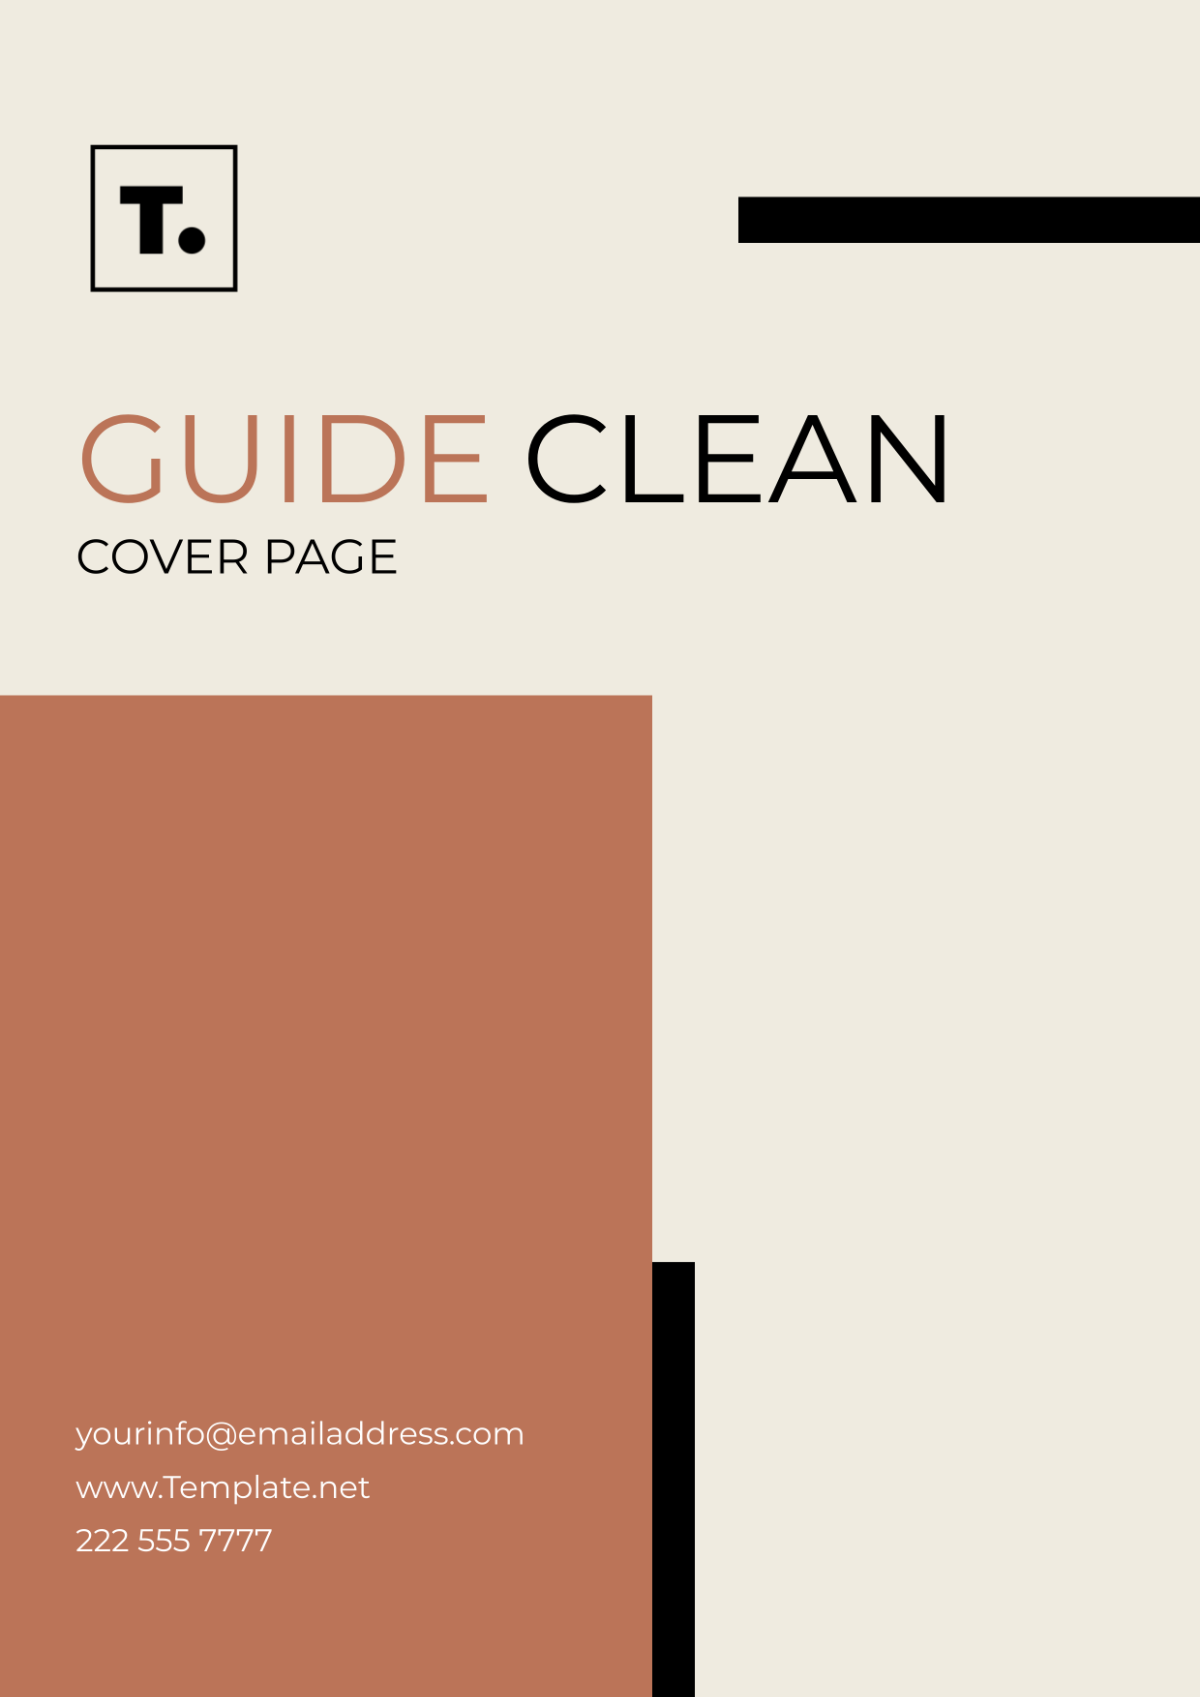 Guide Clean Cover Page Template